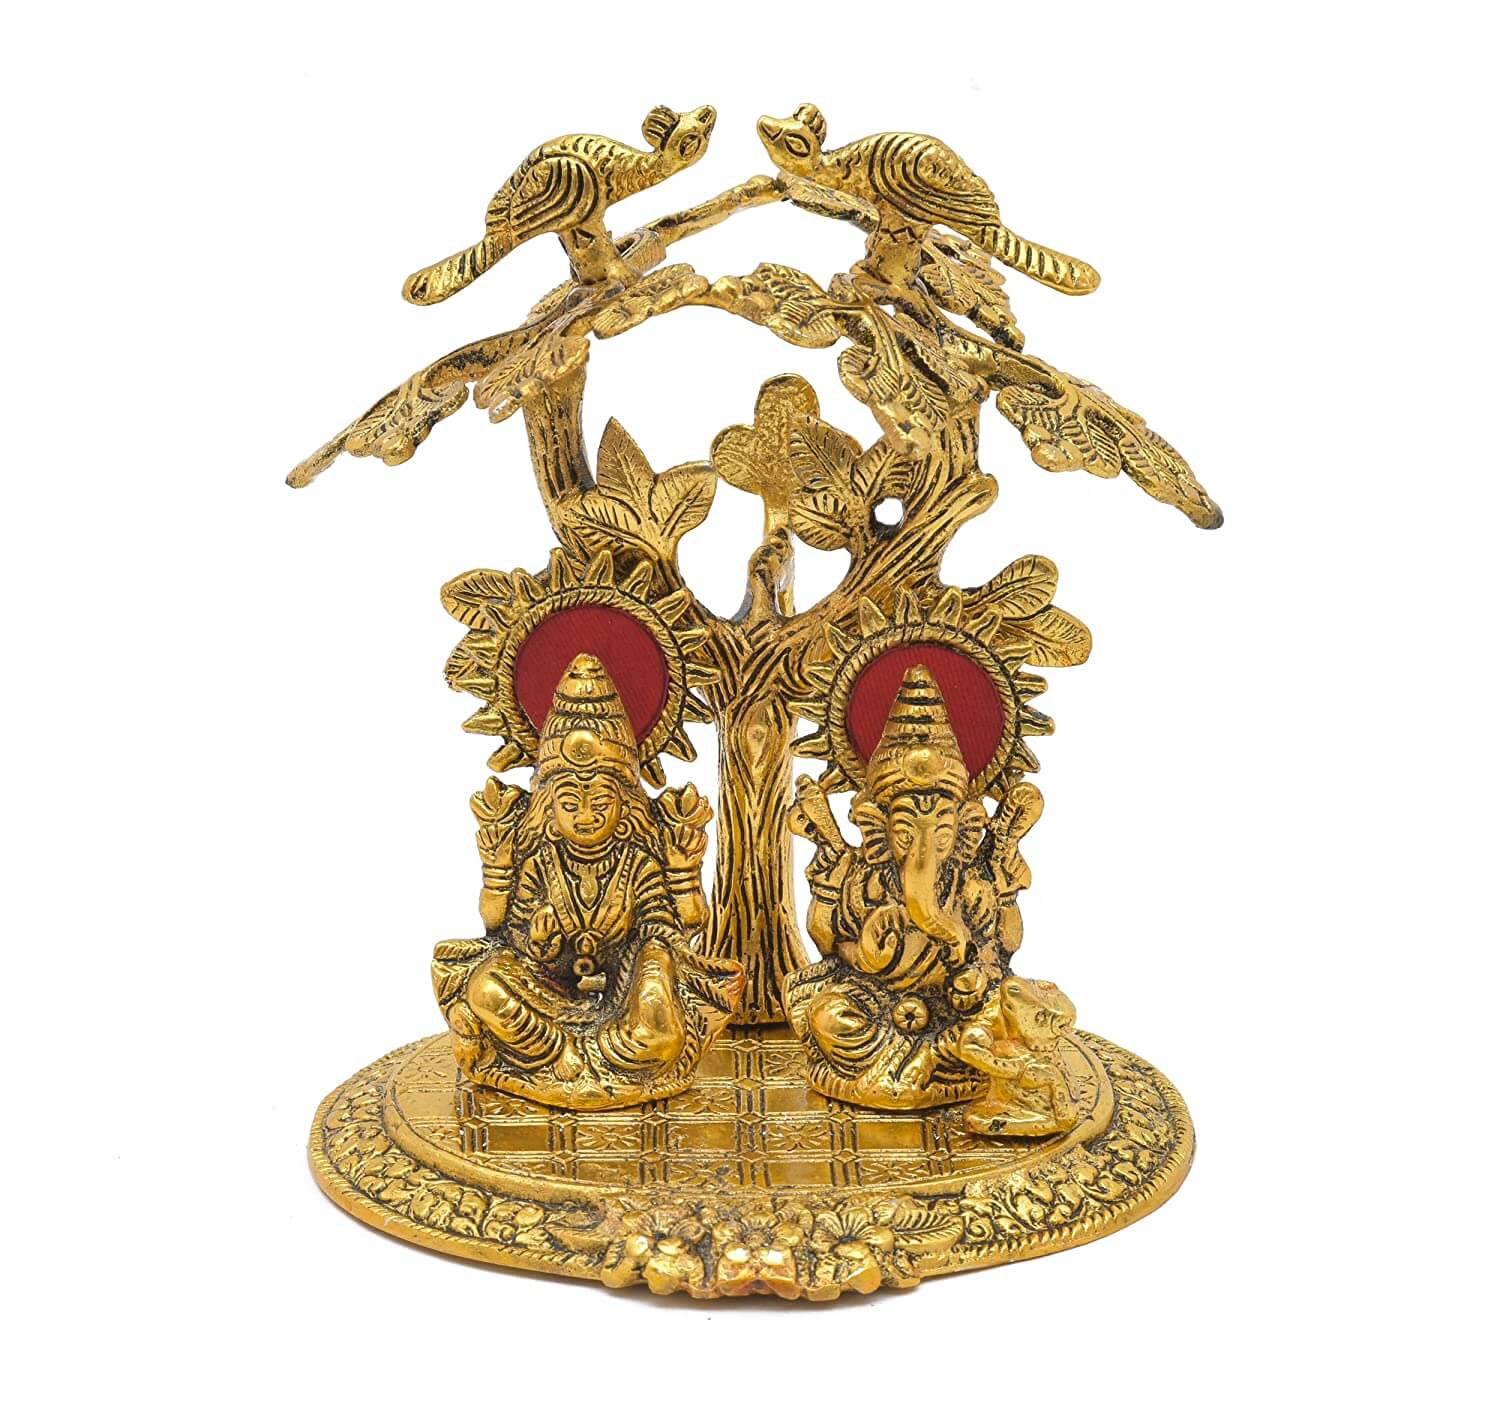 Buy NIRMAL HANDICRAFT Good Luck Gift Items Kamdhenu Cow with Calf and  Krishna Metal Showpiece for Home Decor and Decorative Gift Item Online at  Low Prices in India - Amazon.in